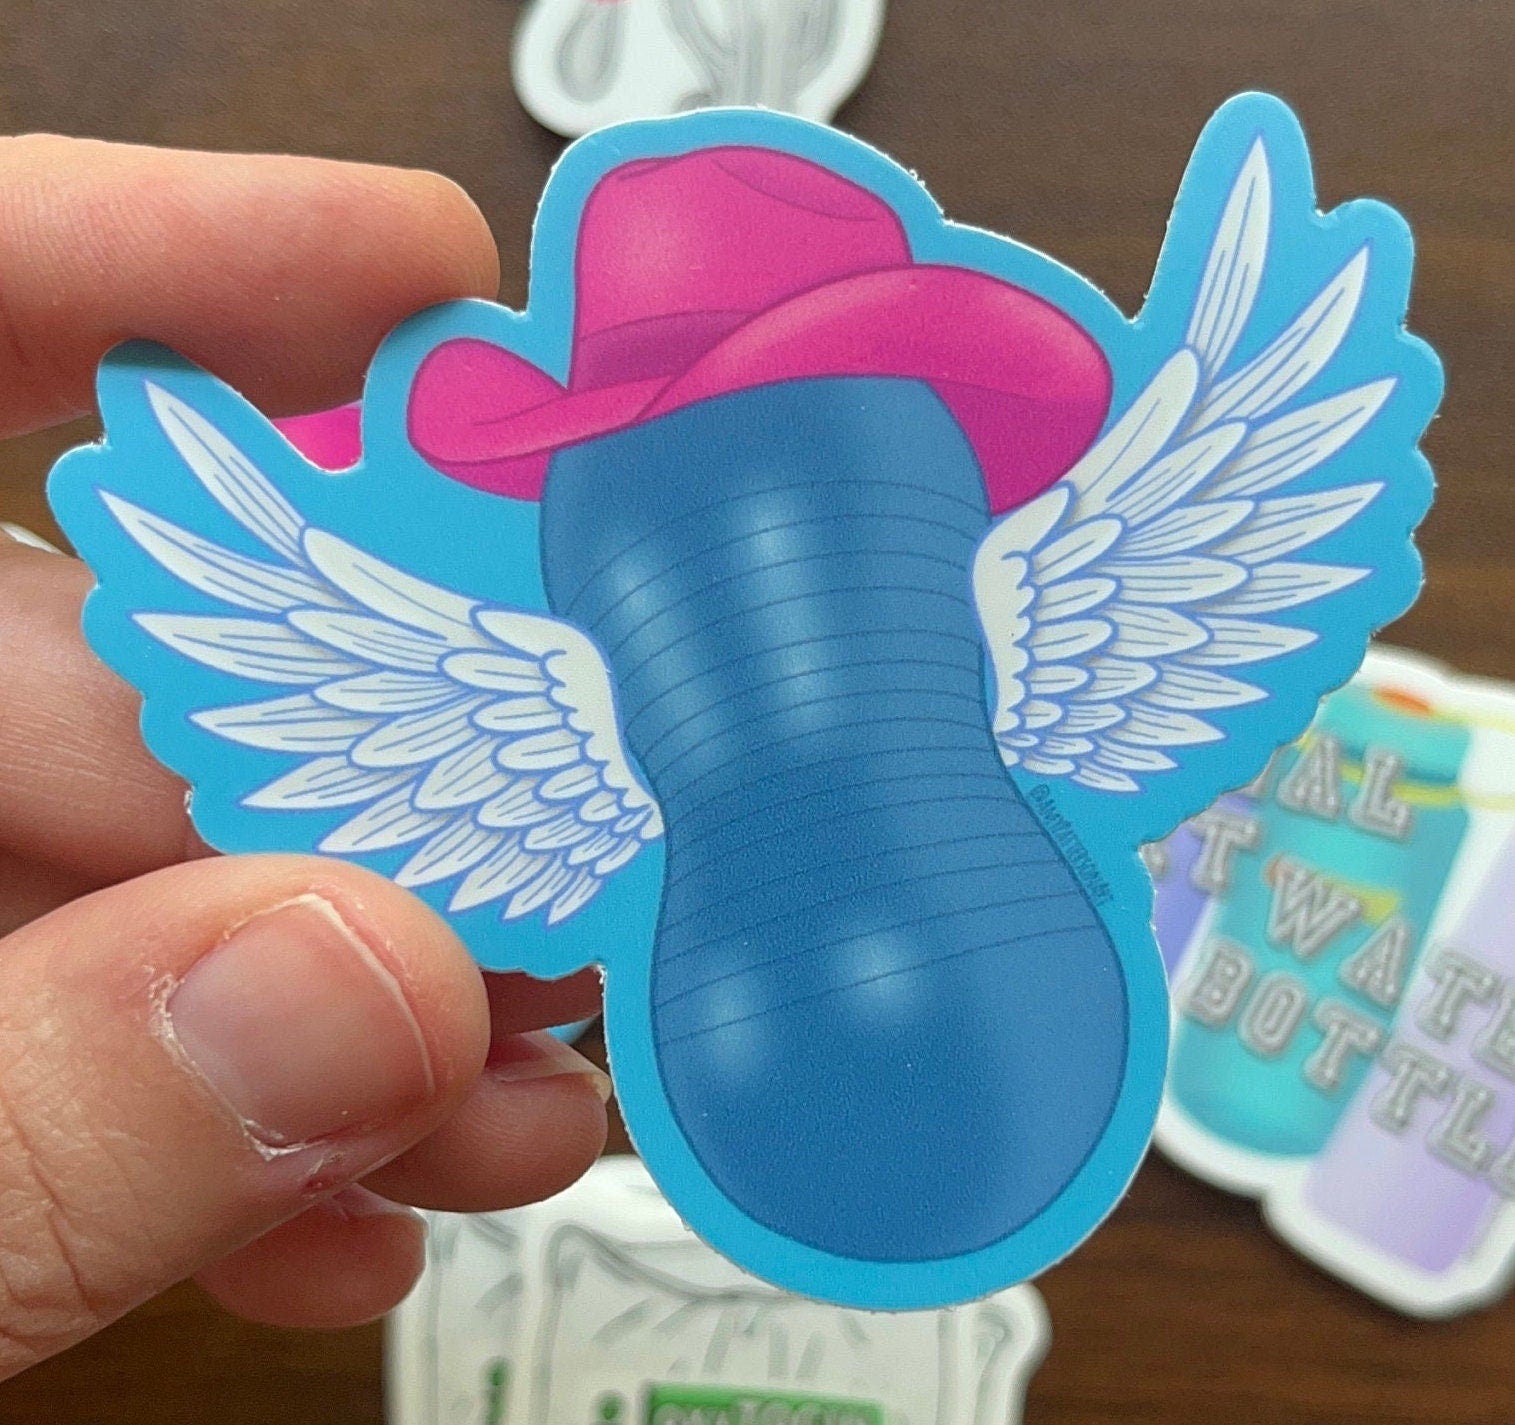 Limited Edition RODEO Flying Cowgirl Peanut Ball Sticker 